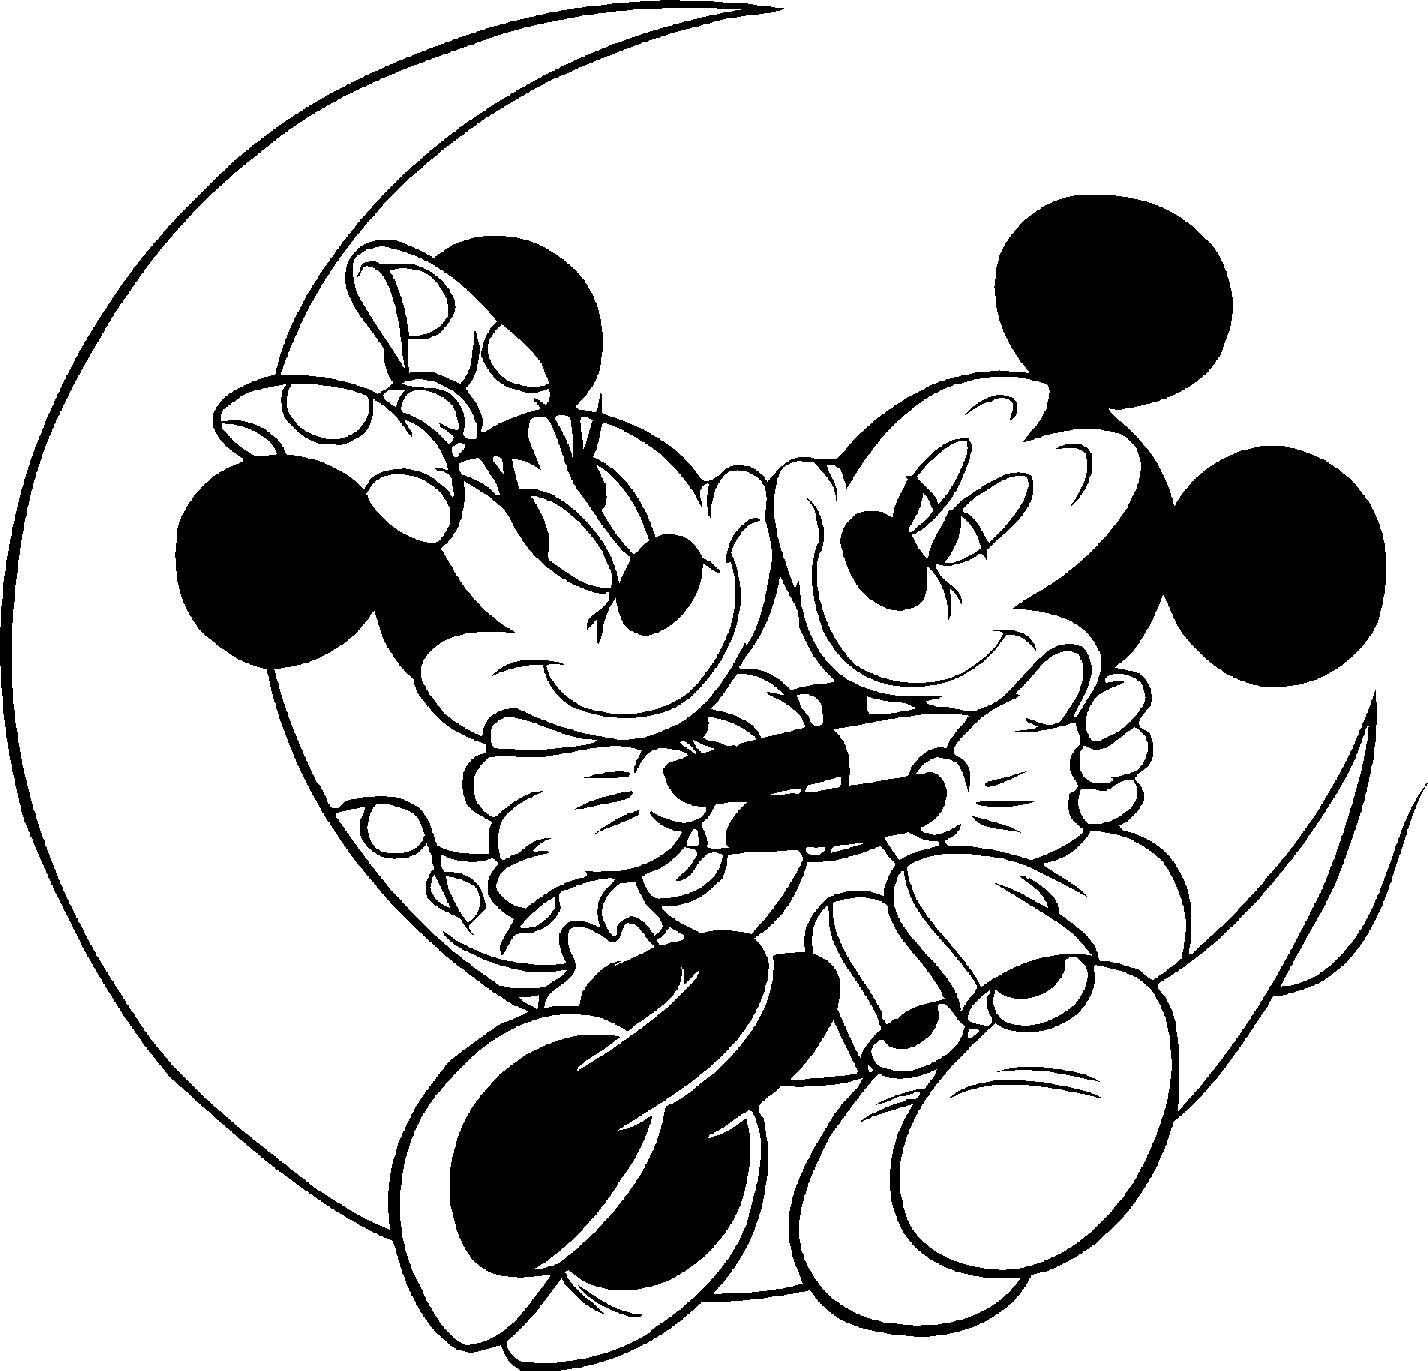 Minnie Mouse Coloring Pages Printable
 Minnie Mouse Coloring Pages To Print For Free